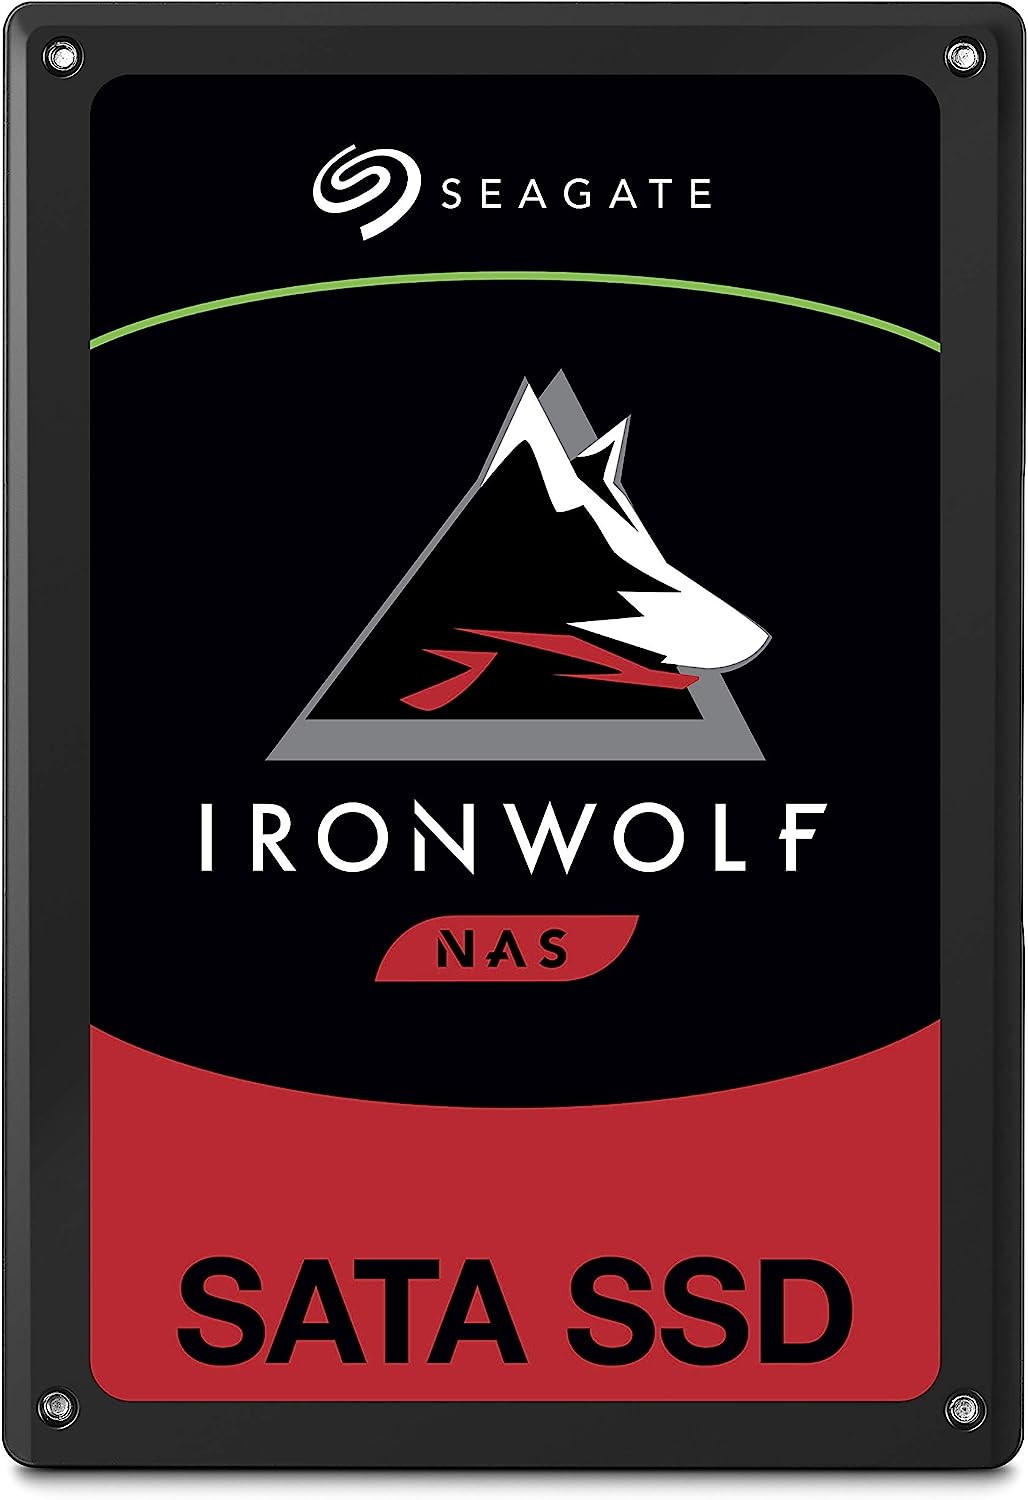 Seagate IronWolf 110 Internal Solid State Drive 240GB